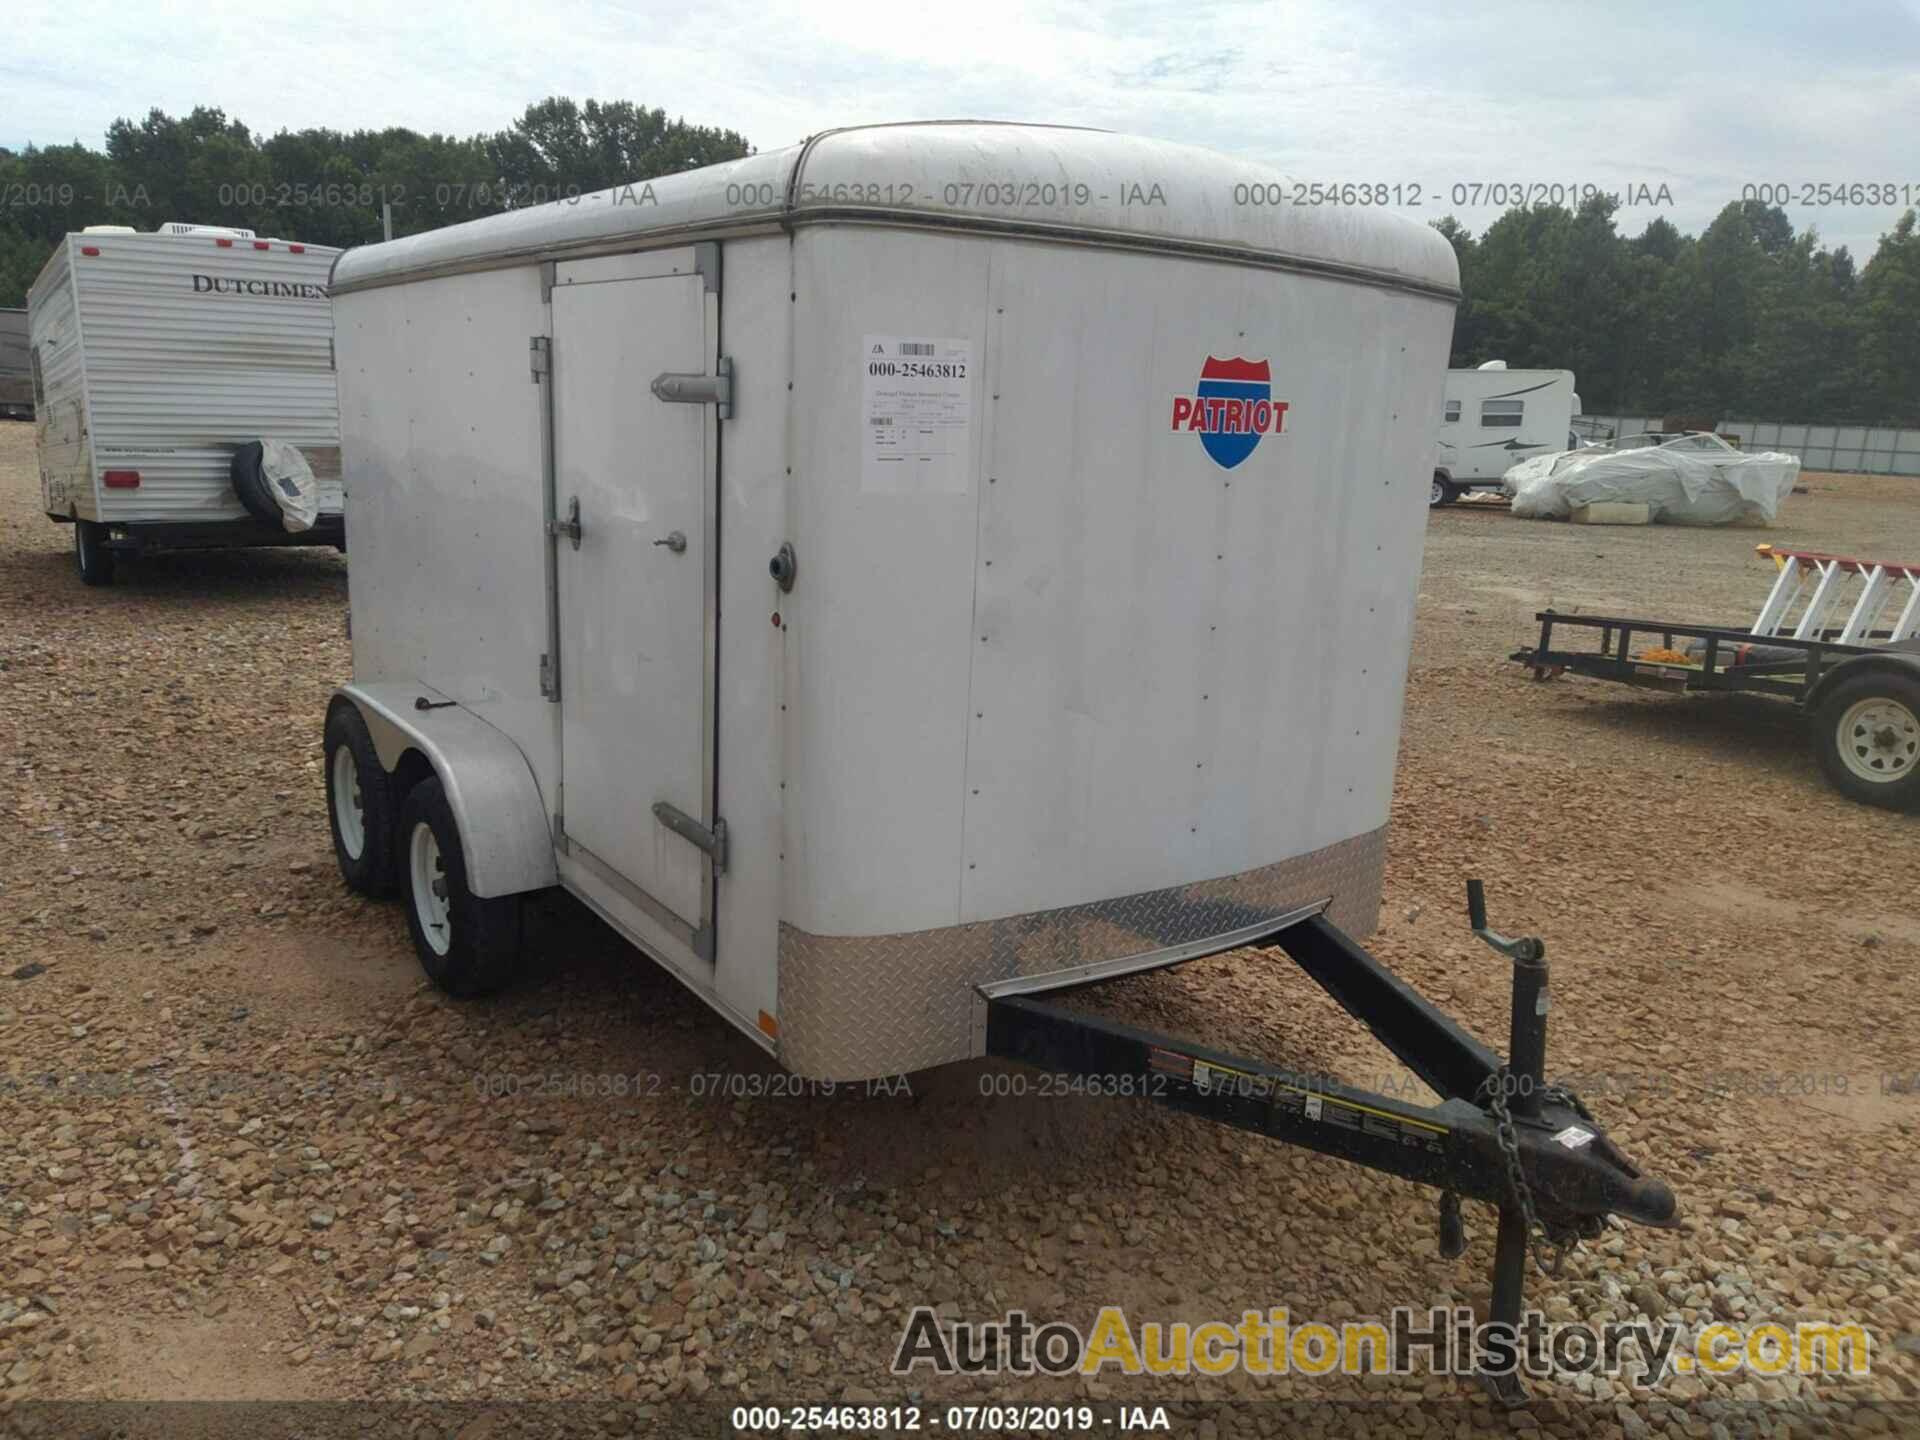 CARRY ON TRAILER, 4YMCL1228FG020003